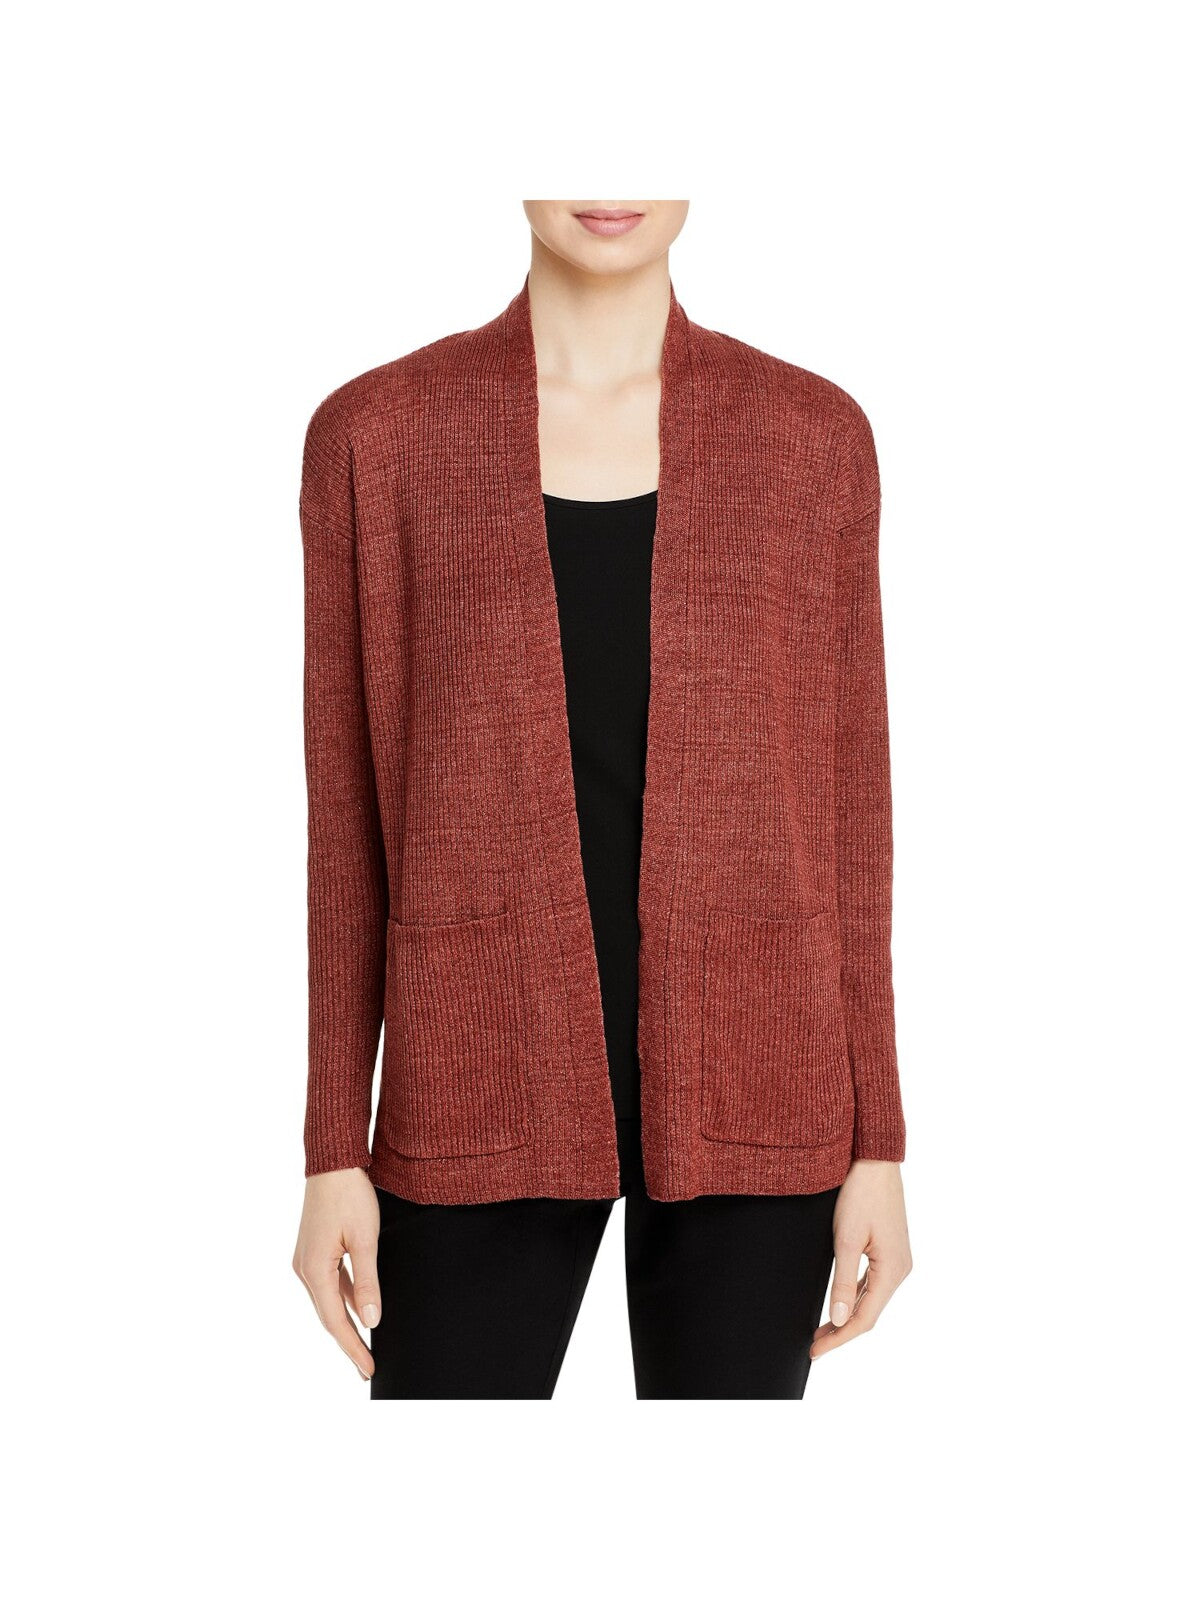 EILEEN FISHER Womens Brown Pocketed Open Cardigan Sweater XL